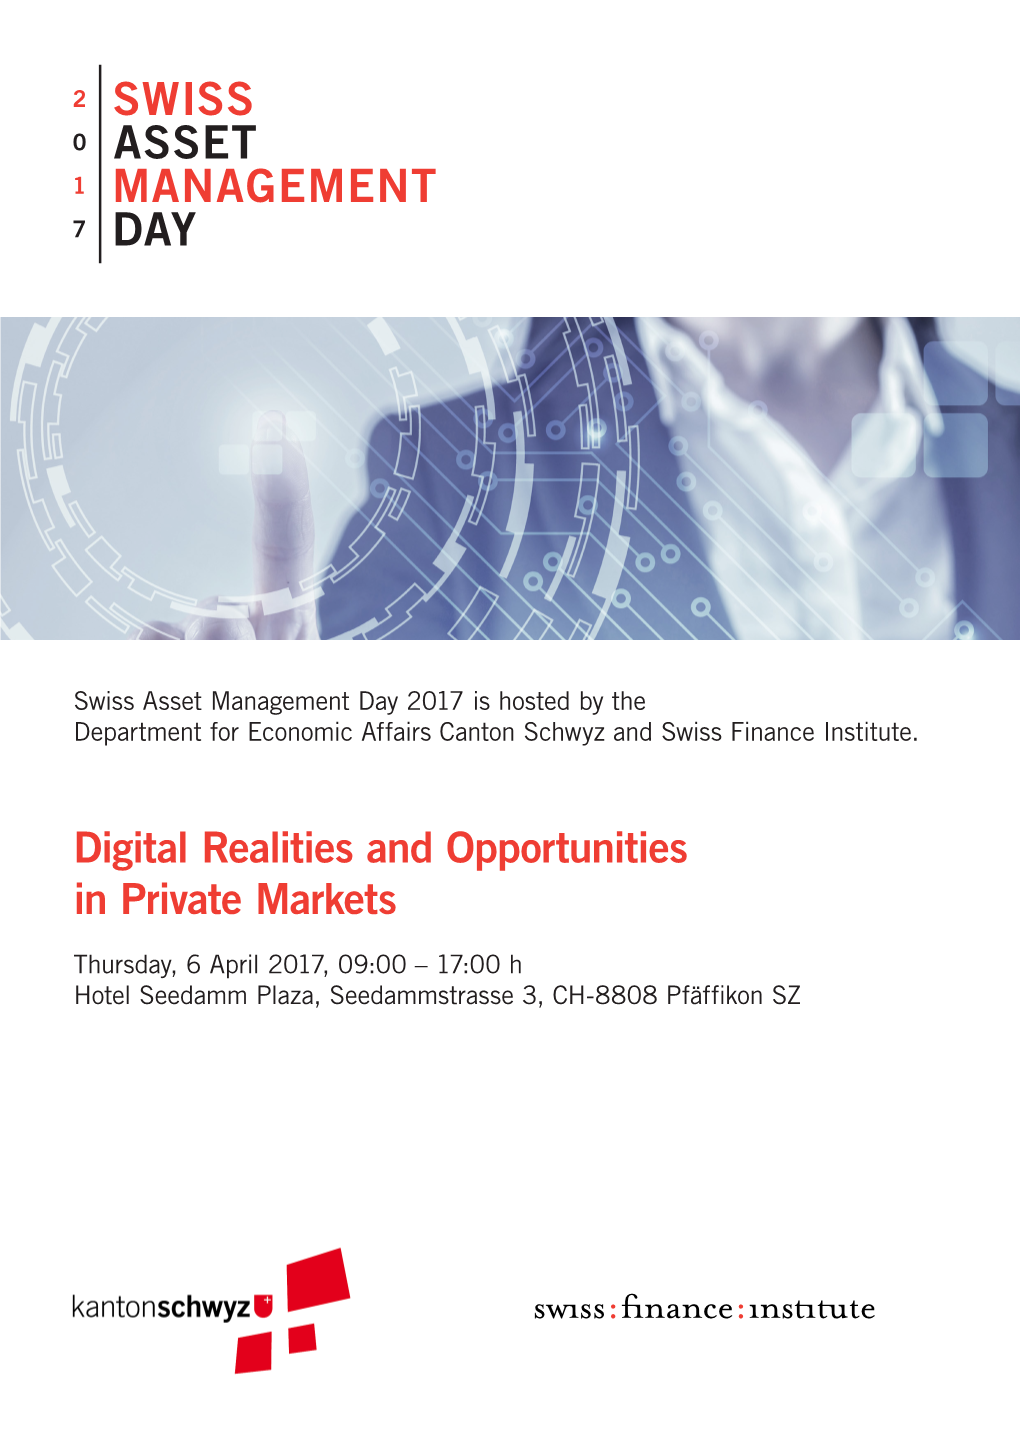 Digital Realities and Opportunities in Private Markets